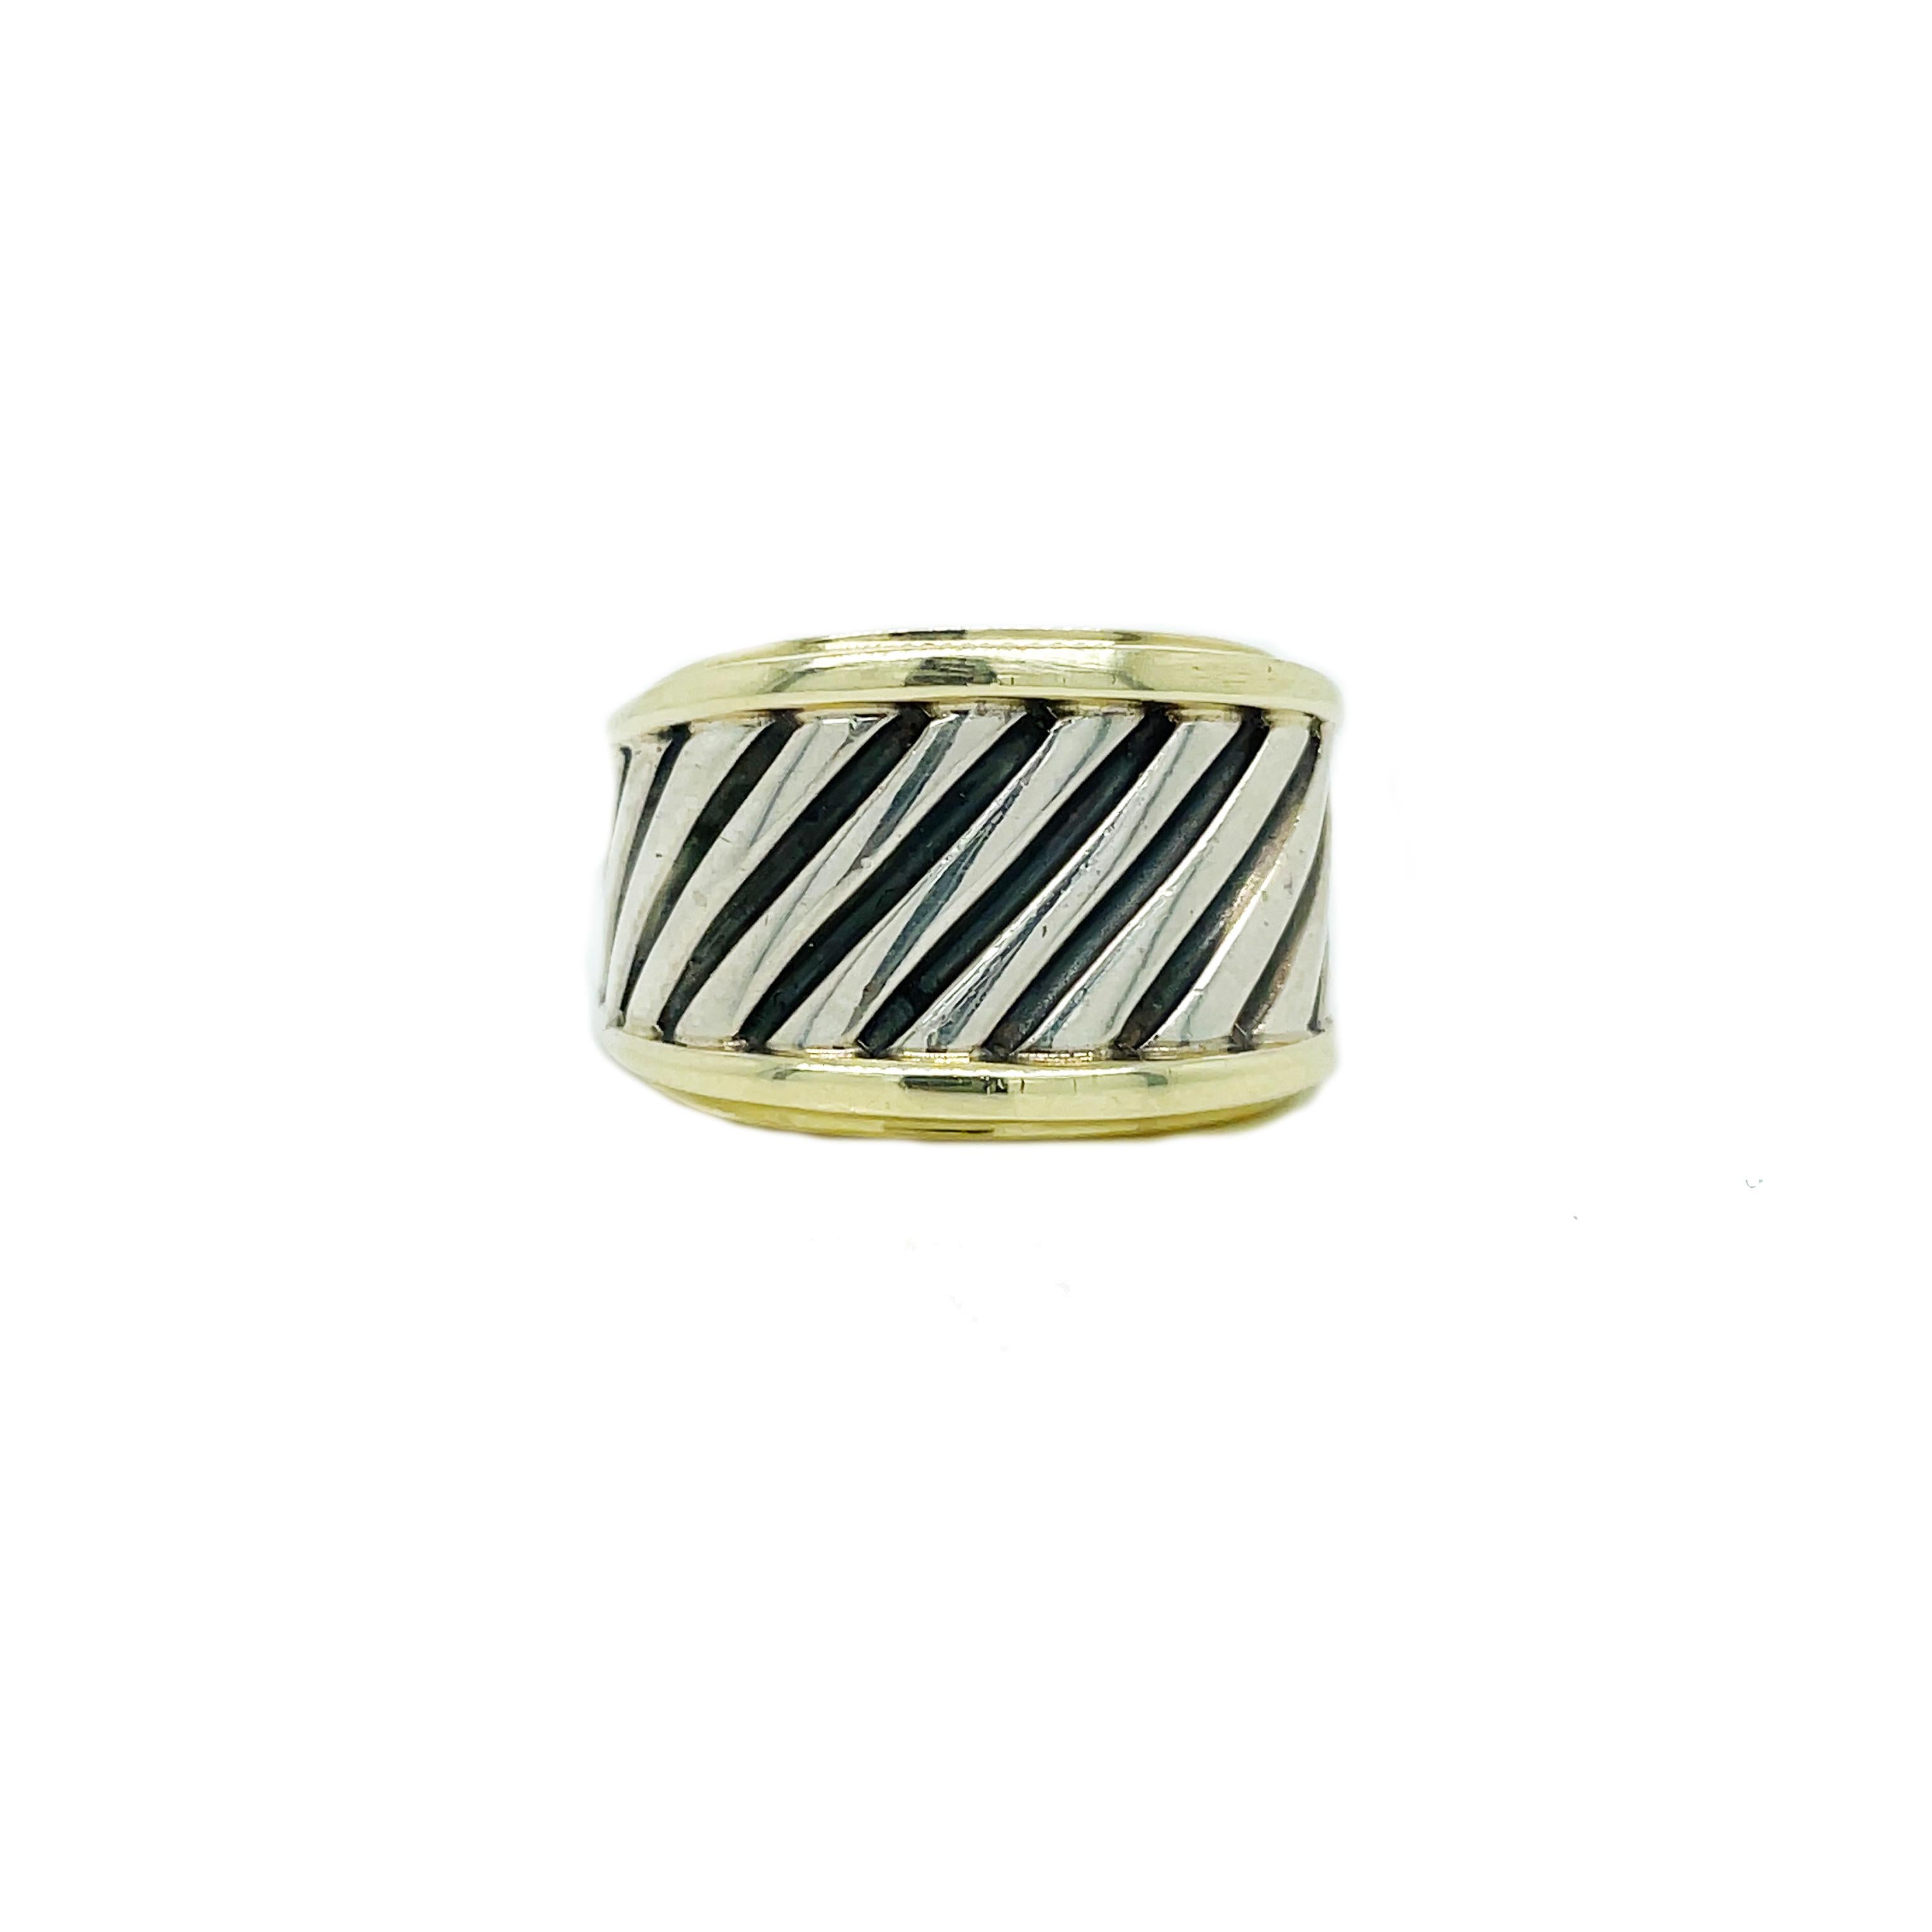 This is a classic David Yurman ring set in 14K yellow gold and bright sterling silver with a wide band and twisted cable design!  It is crafted of sterling silver and 14K yellow gold and has a simple but elegant design. The top is a rectangular